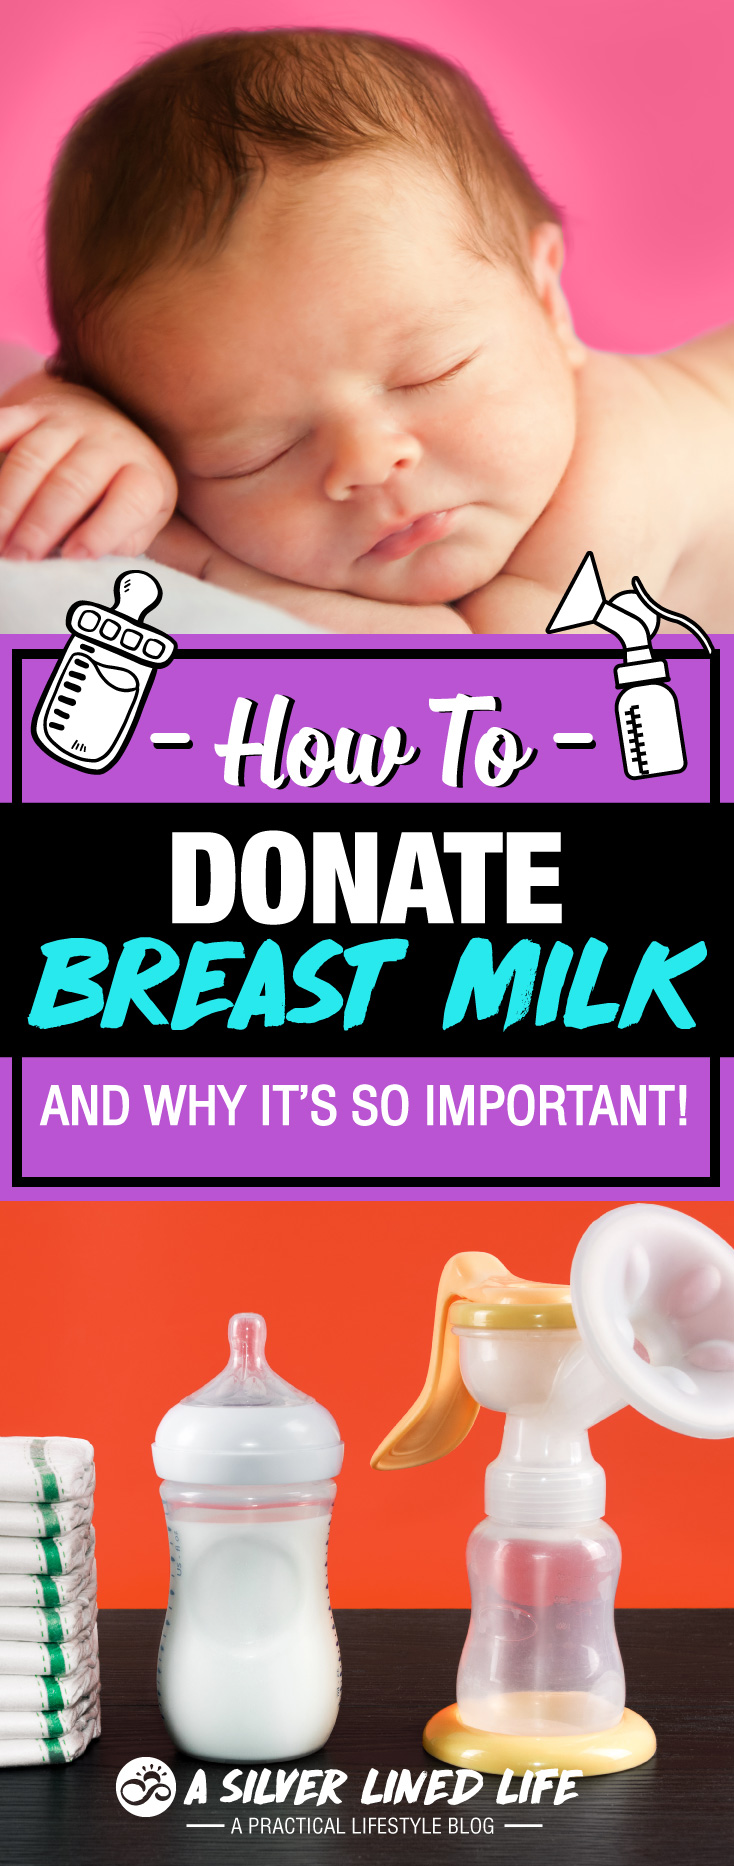 Breast milk storage, increase, uses and facts for supply, production, and pumping, all within the benefits and guidelines to donate responsibly. Amazing interview for donating! A must know for all moms who have excess breast milk!